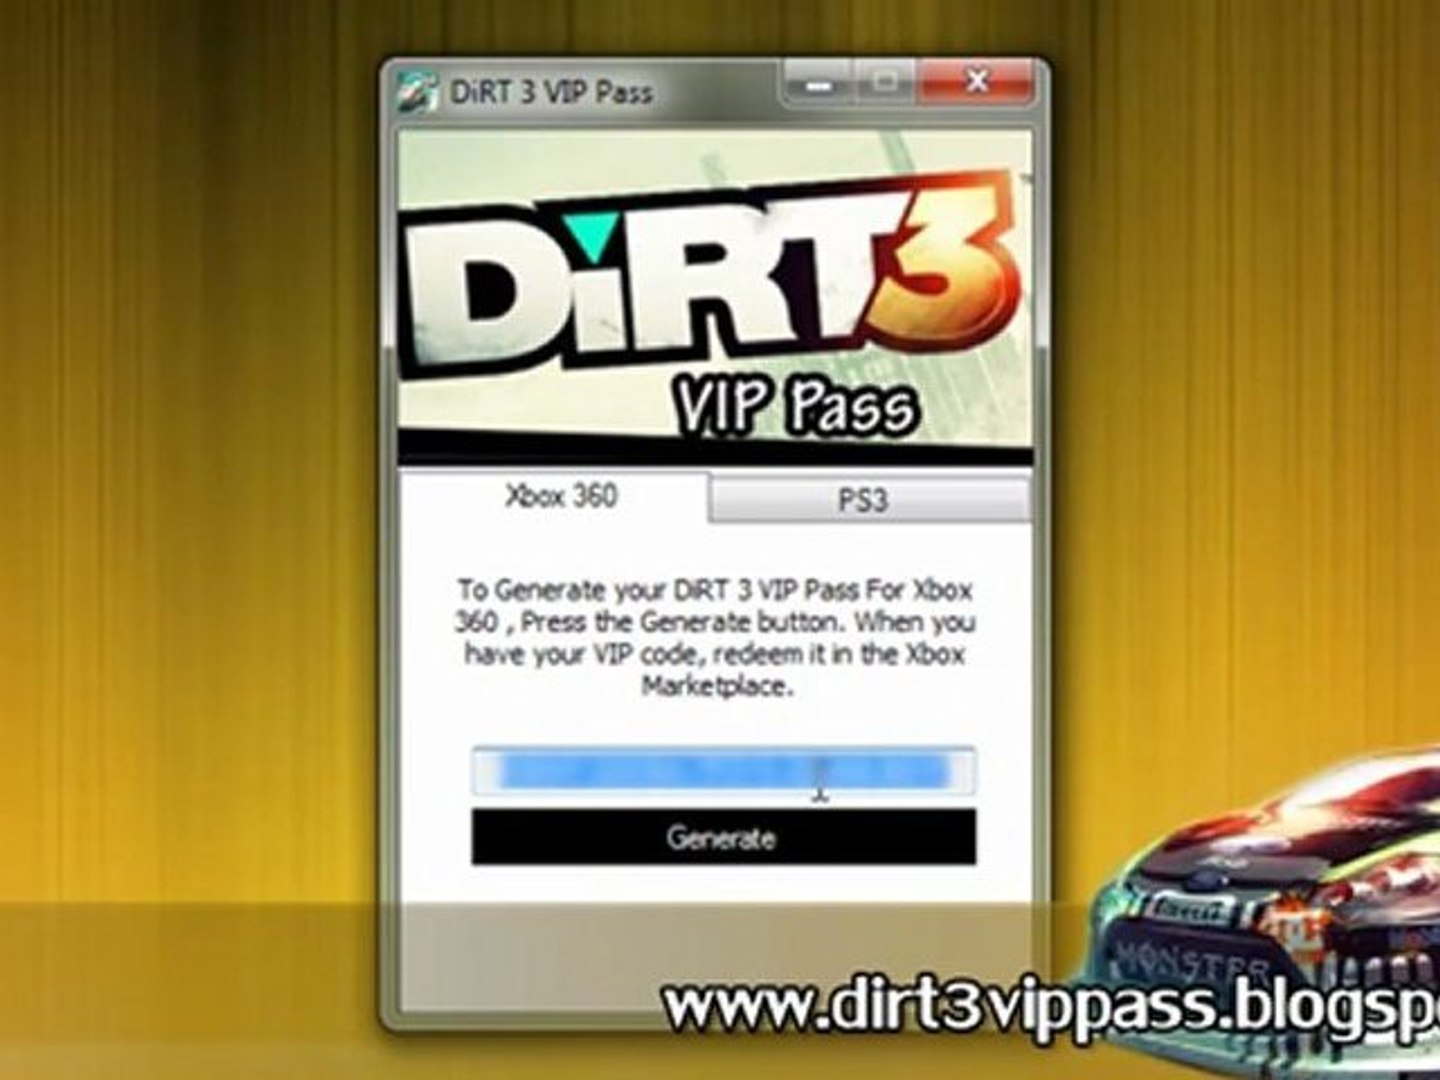 Dirt 3 Online VIP Pass Code Leaked - Free Download - video Dailymotion